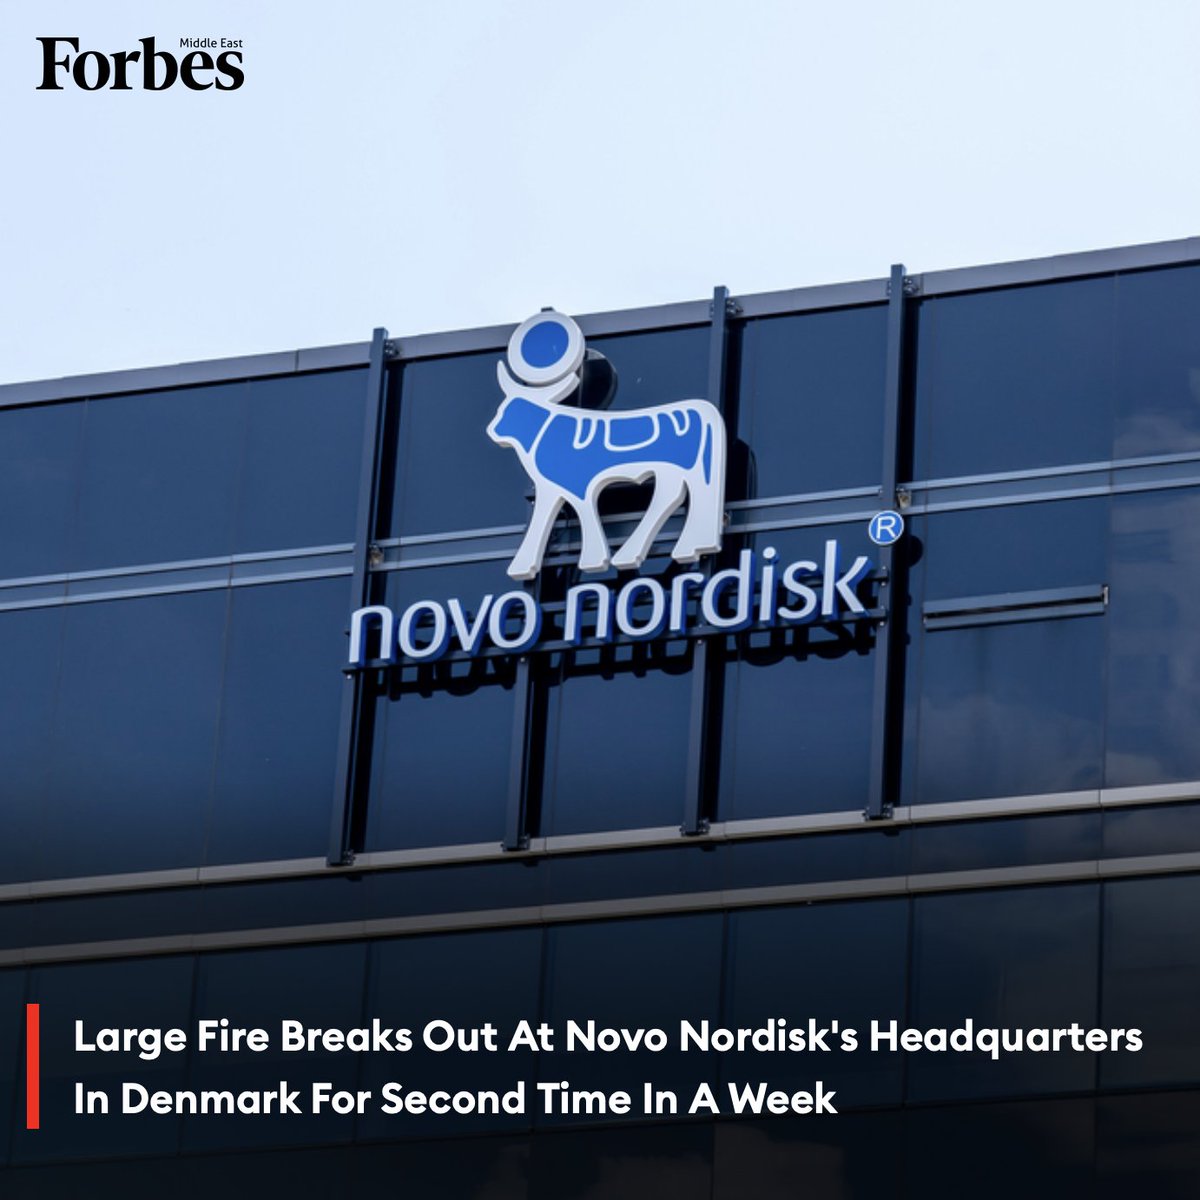 A massive fire broke out Wednesday morning at Danish pharmaceutical giant Novo Nordisk's headquarters site in Bagsværd, Denmark, and is swiftly spreading to other buildings. #Forbes For more details: 🔗 on.forbesmiddleeast.com/bam4